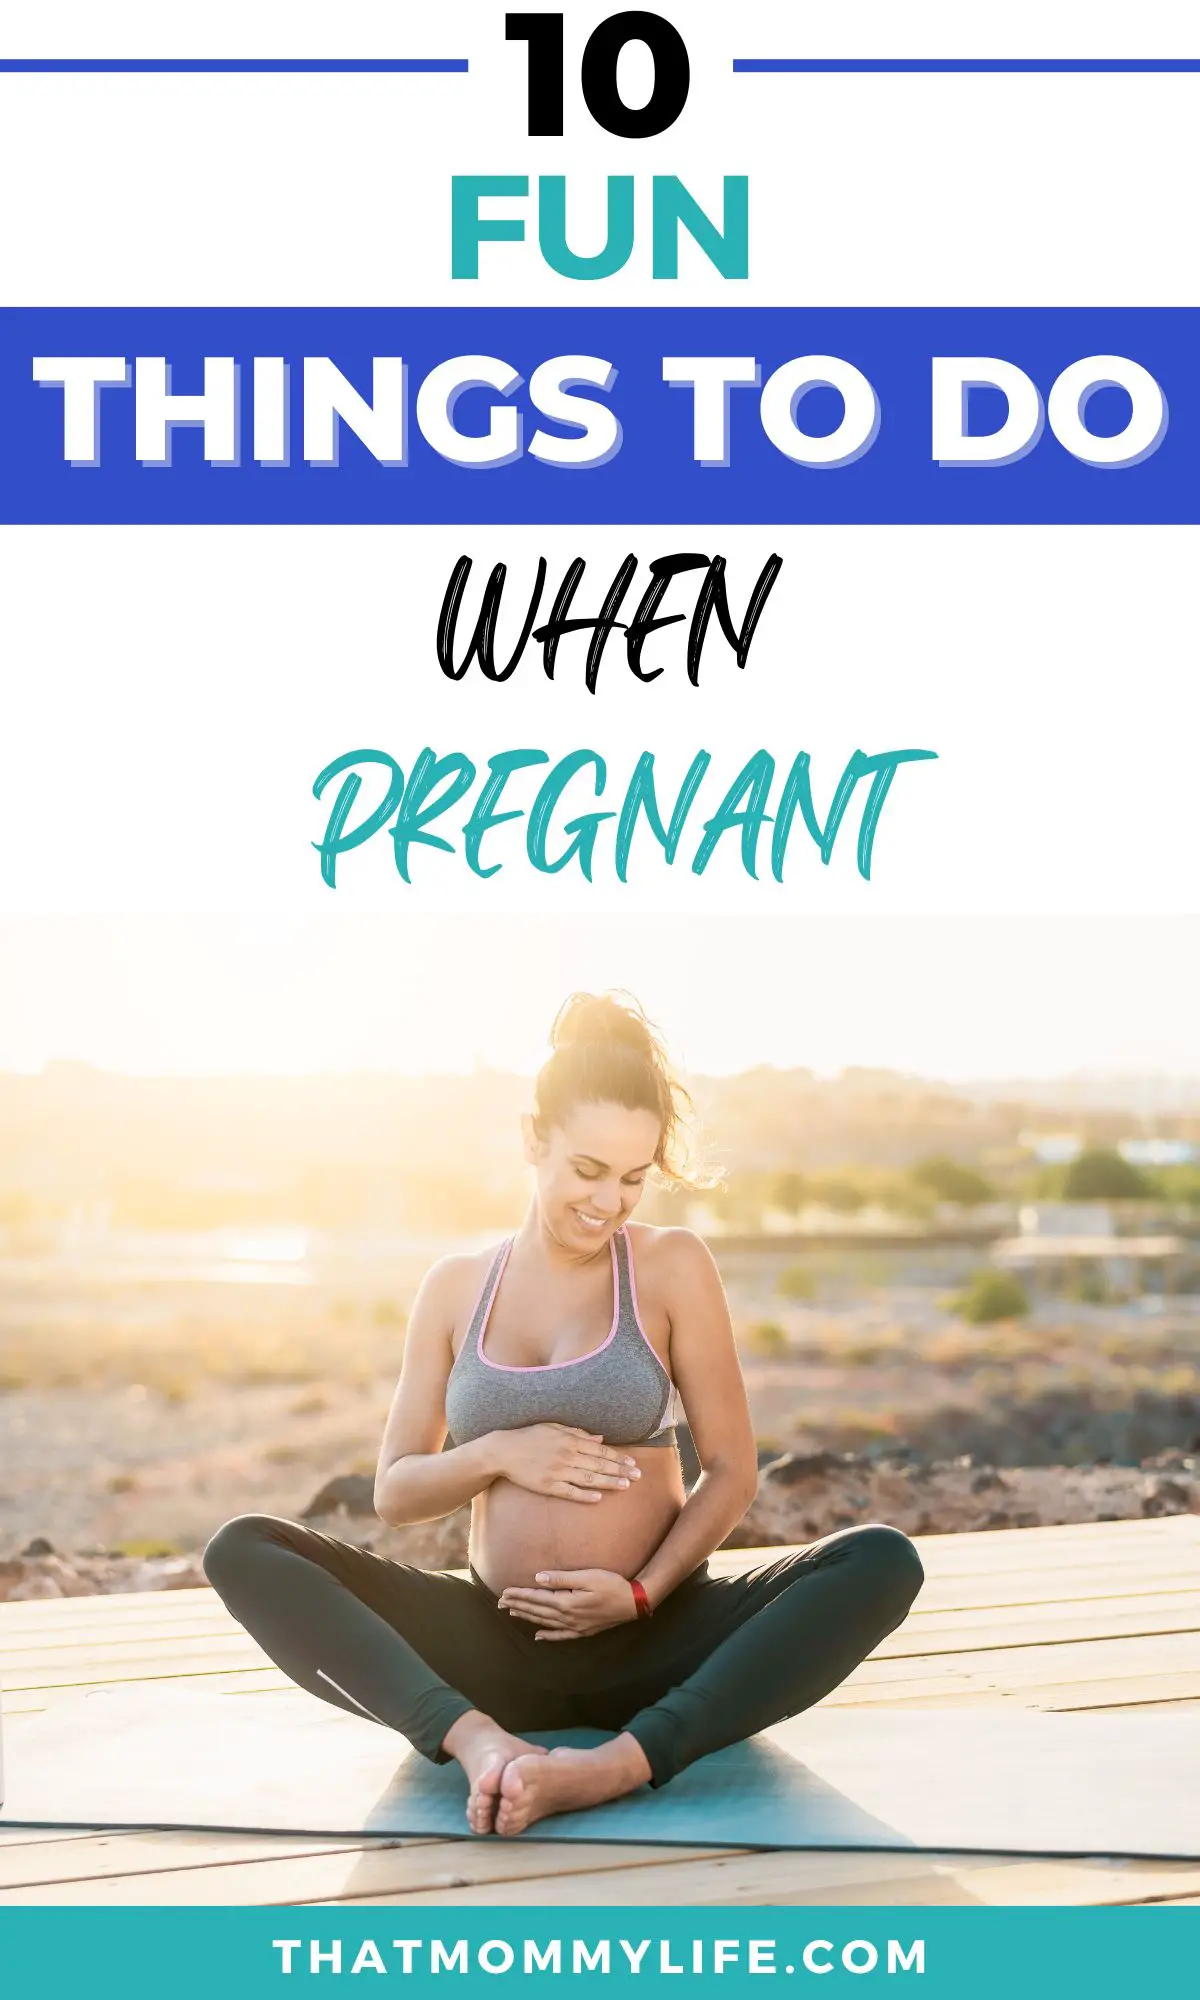 fun things to do when pregnant